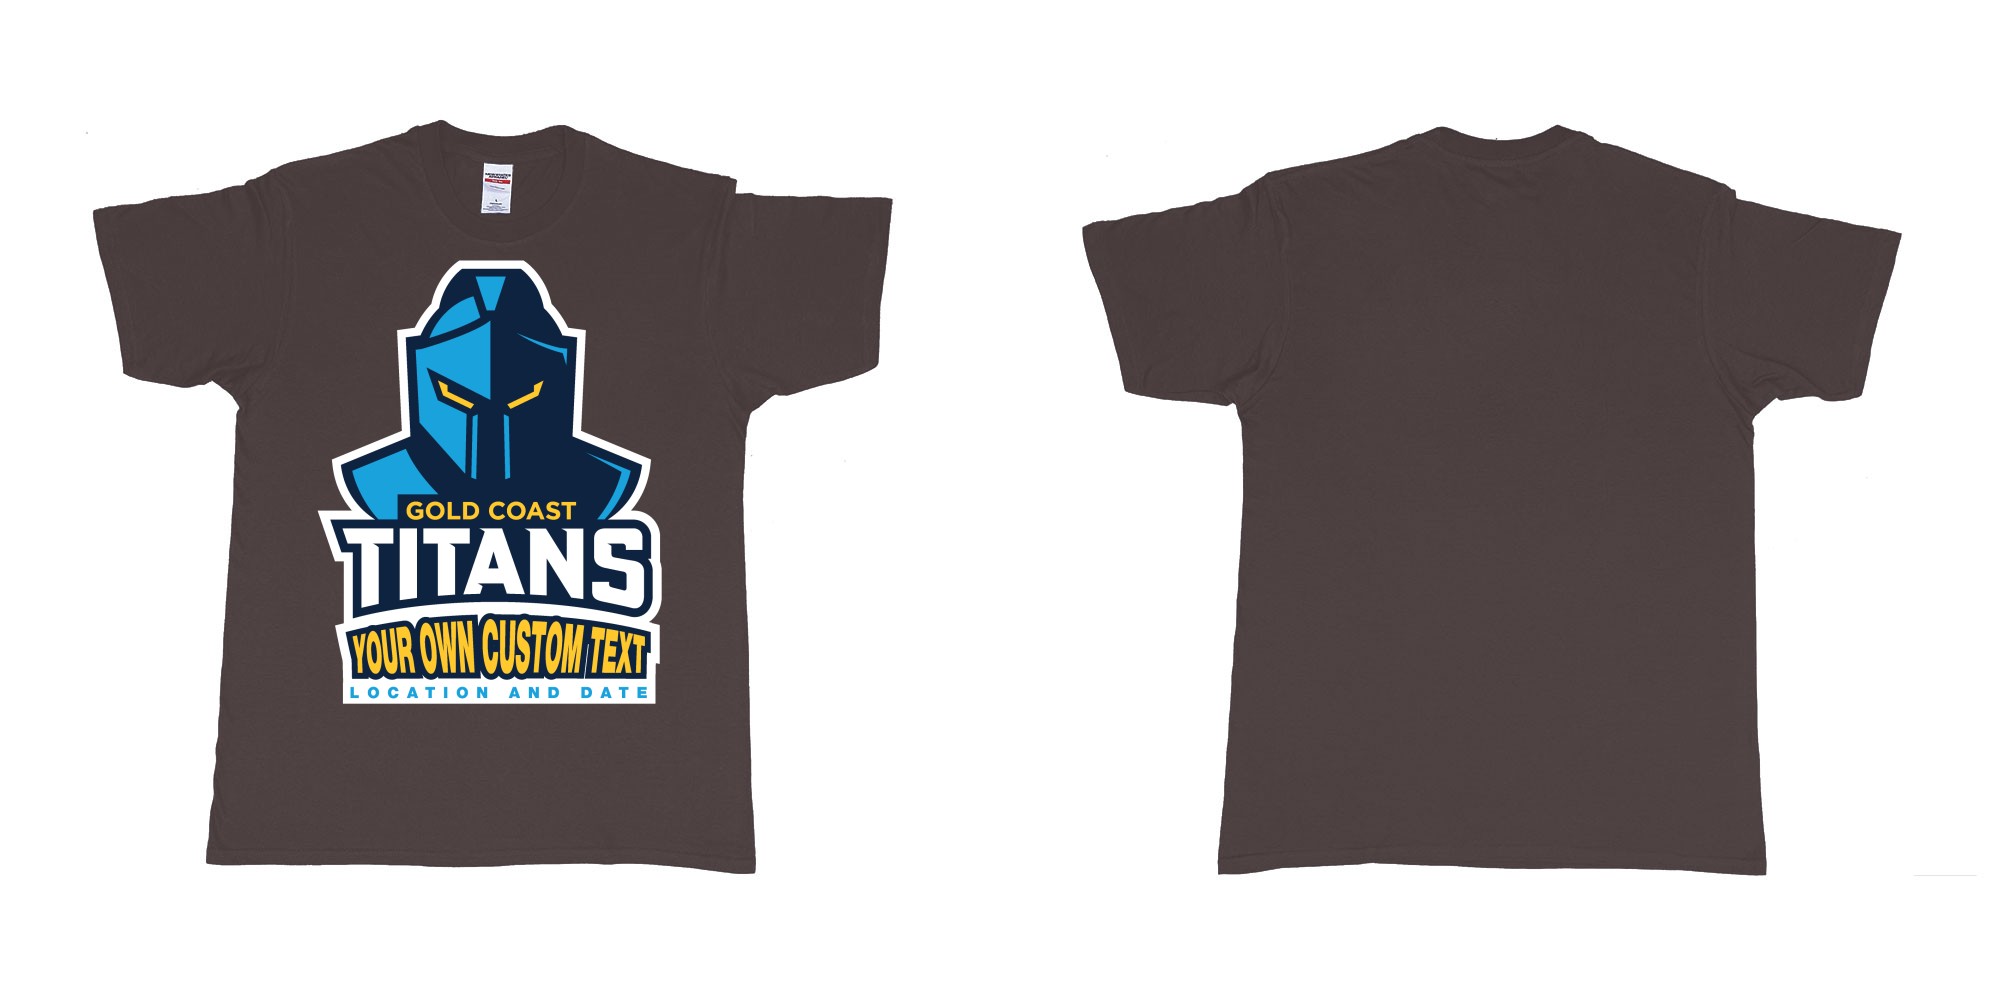 Custom tshirt design gold coast titans own custom design print in fabric color dark-chocolate choice your own text made in Bali by The Pirate Way